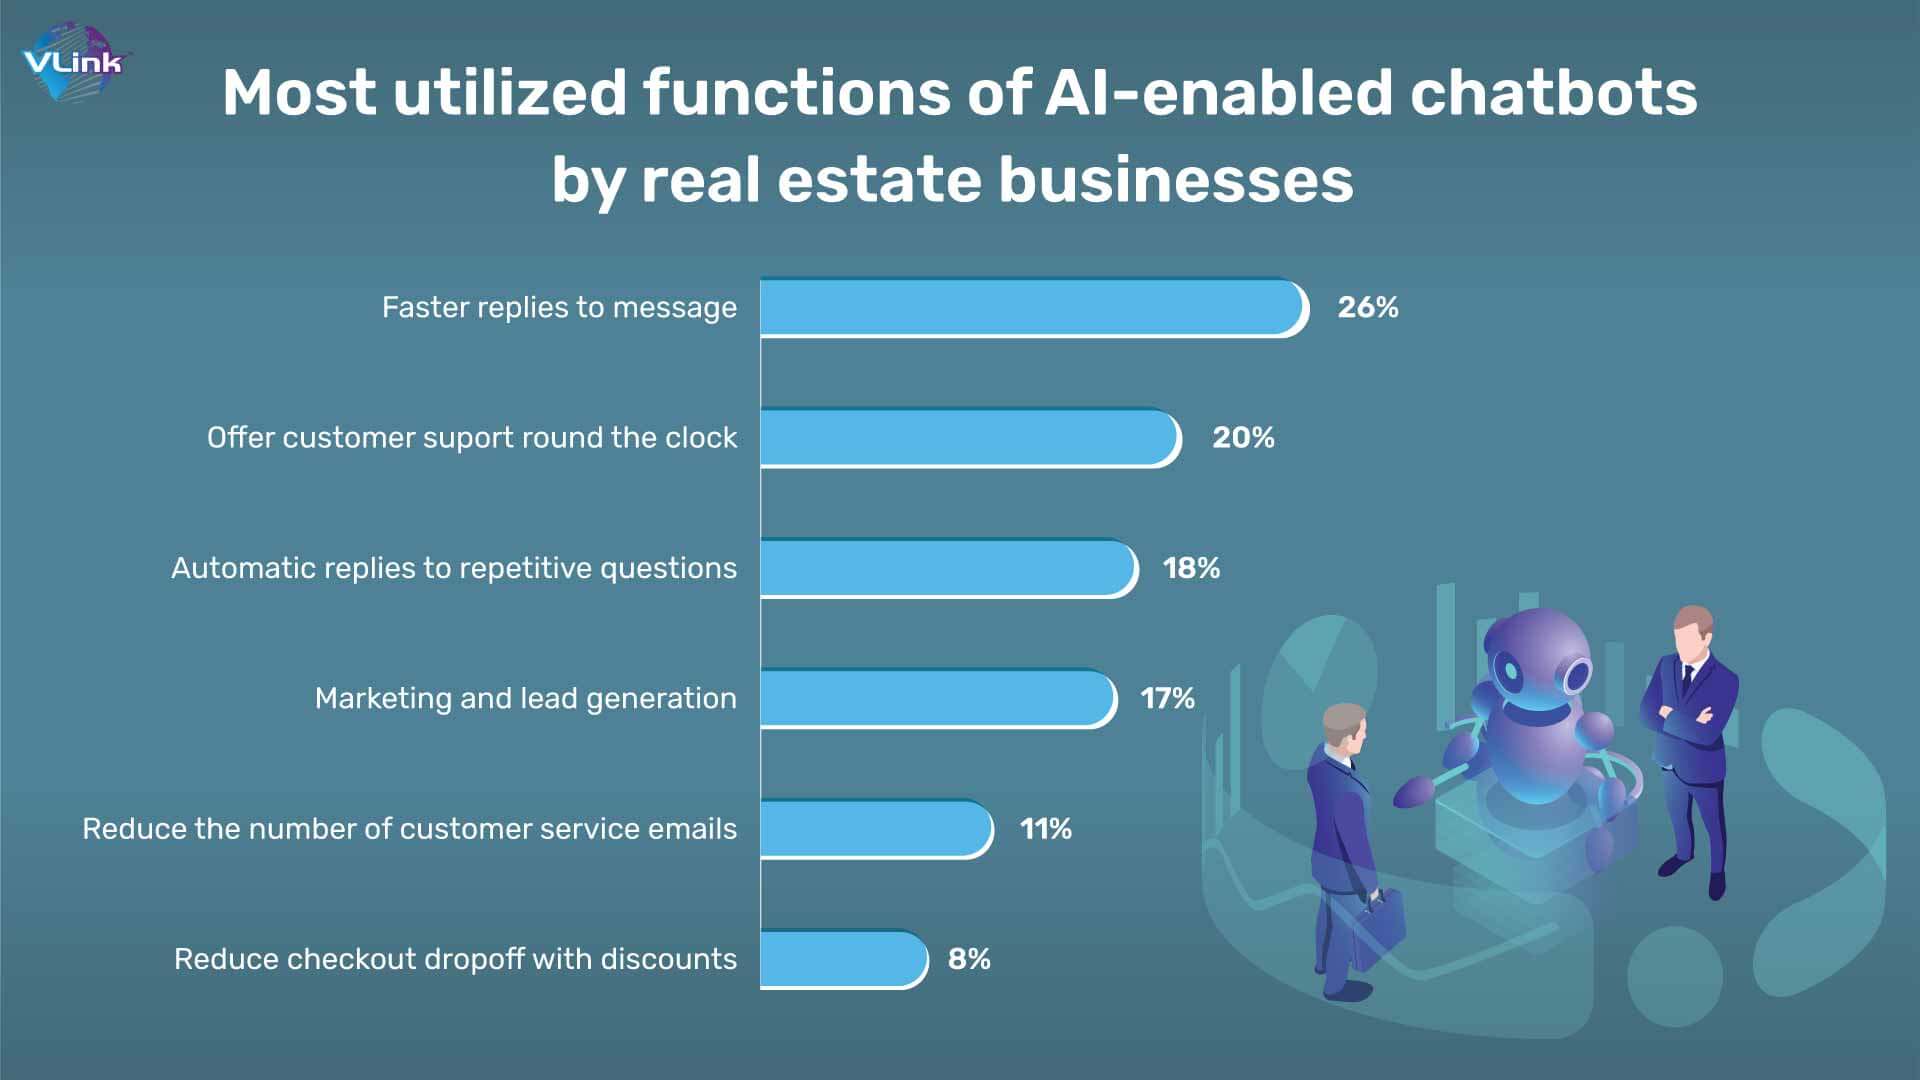 Most utilized functions of AI-enabled chatbots by real estate businesses